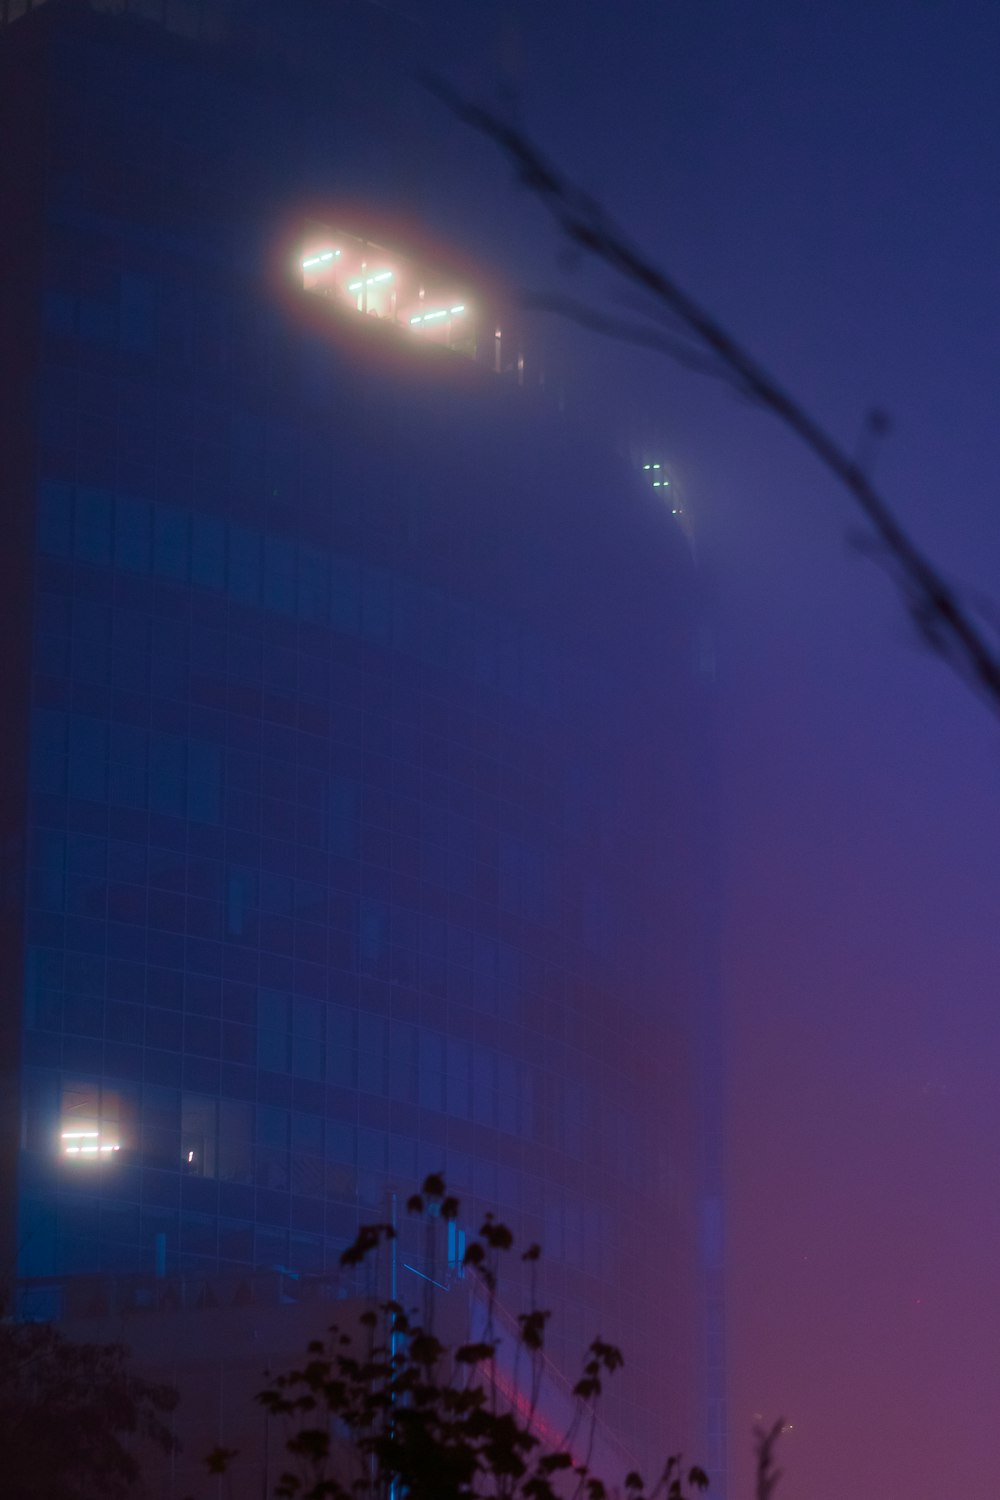 a foggy night in a city with a tall building